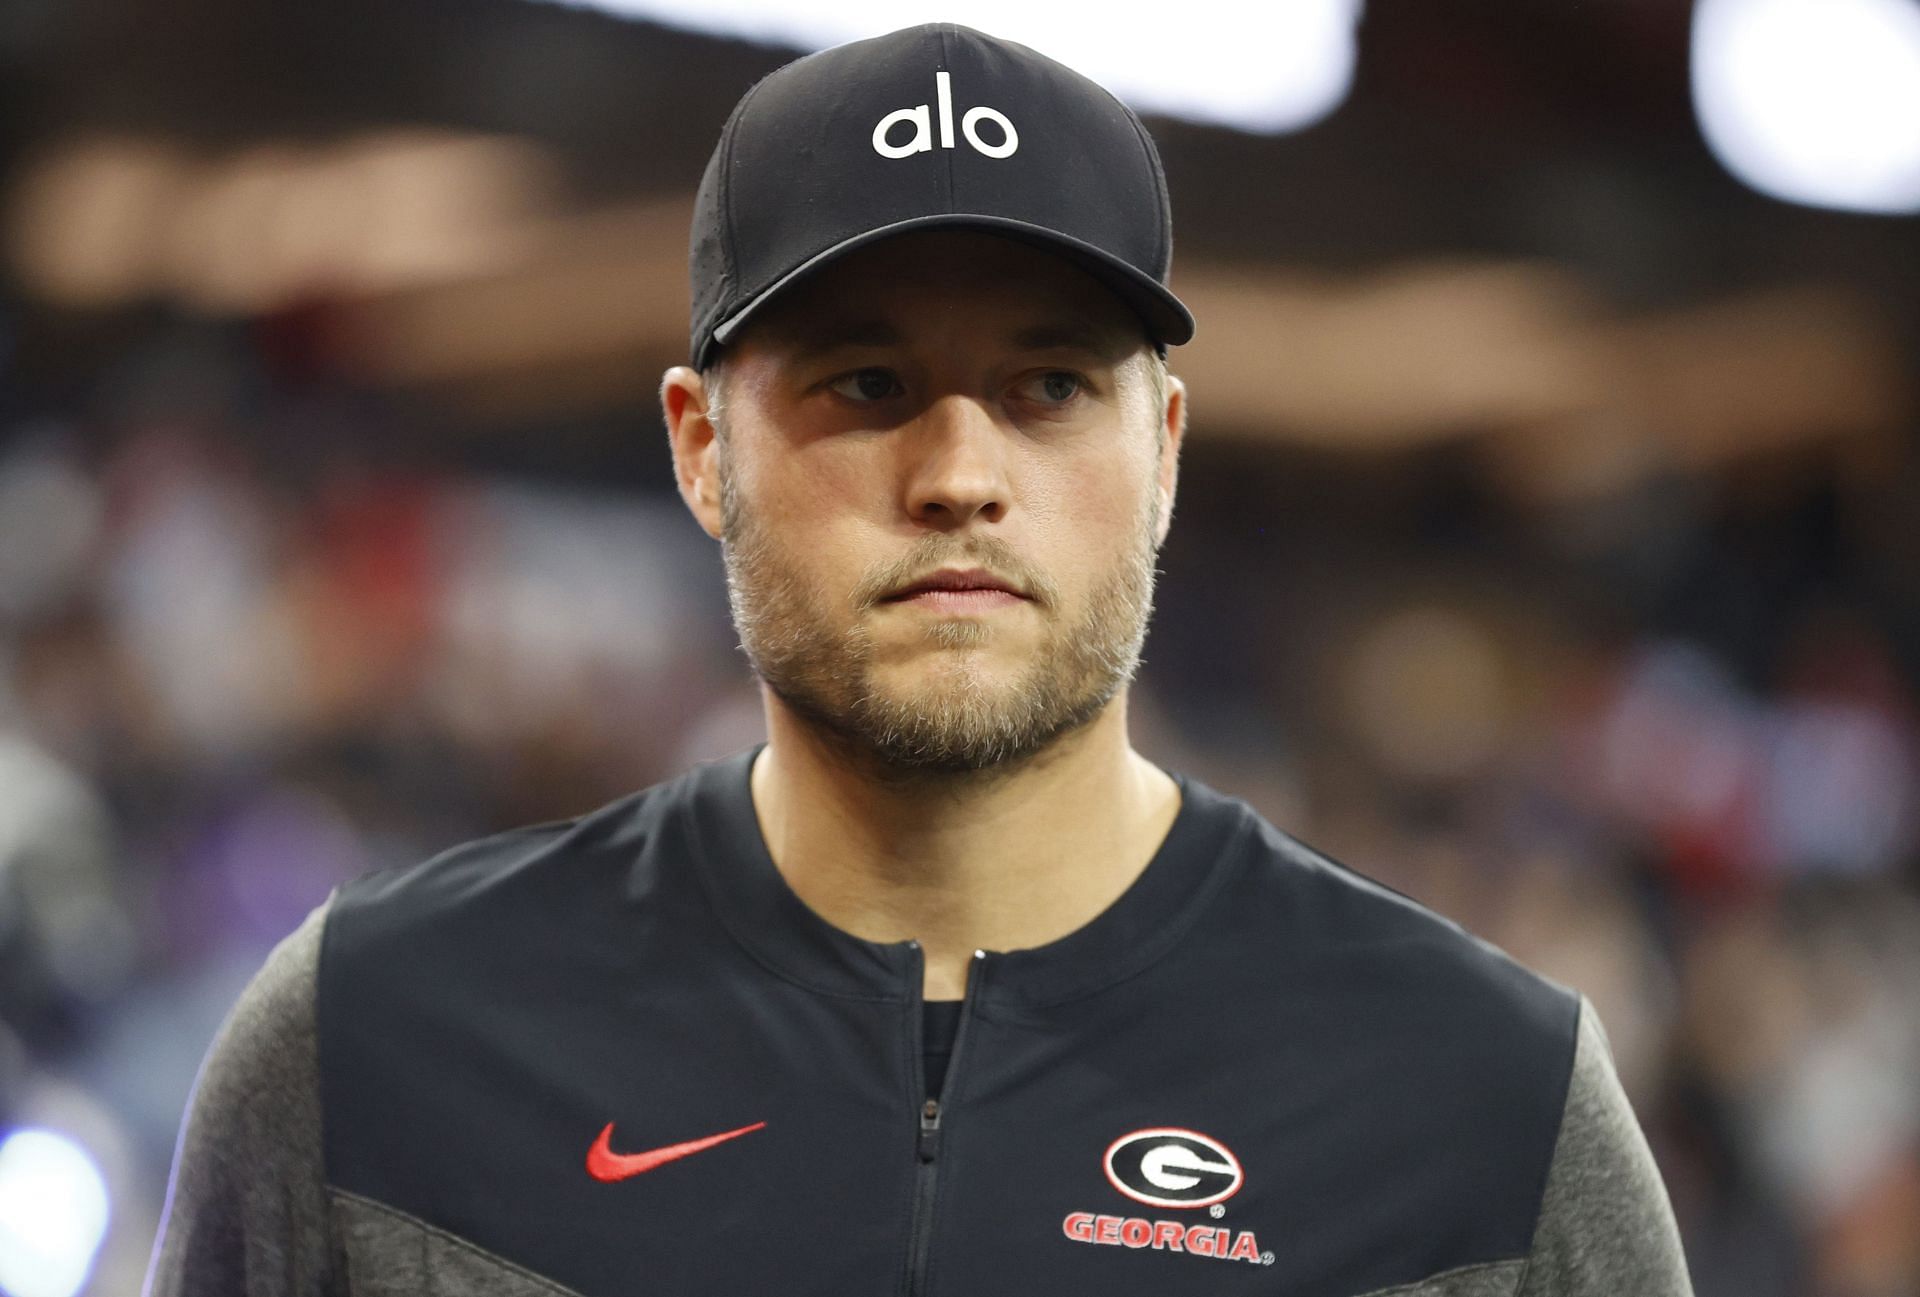 Former Georgia Bulldogs quarterback Matthew Stafford looks on before Georgia&#039;s College Football Playoff national championship game against the TCU Horned Frogs